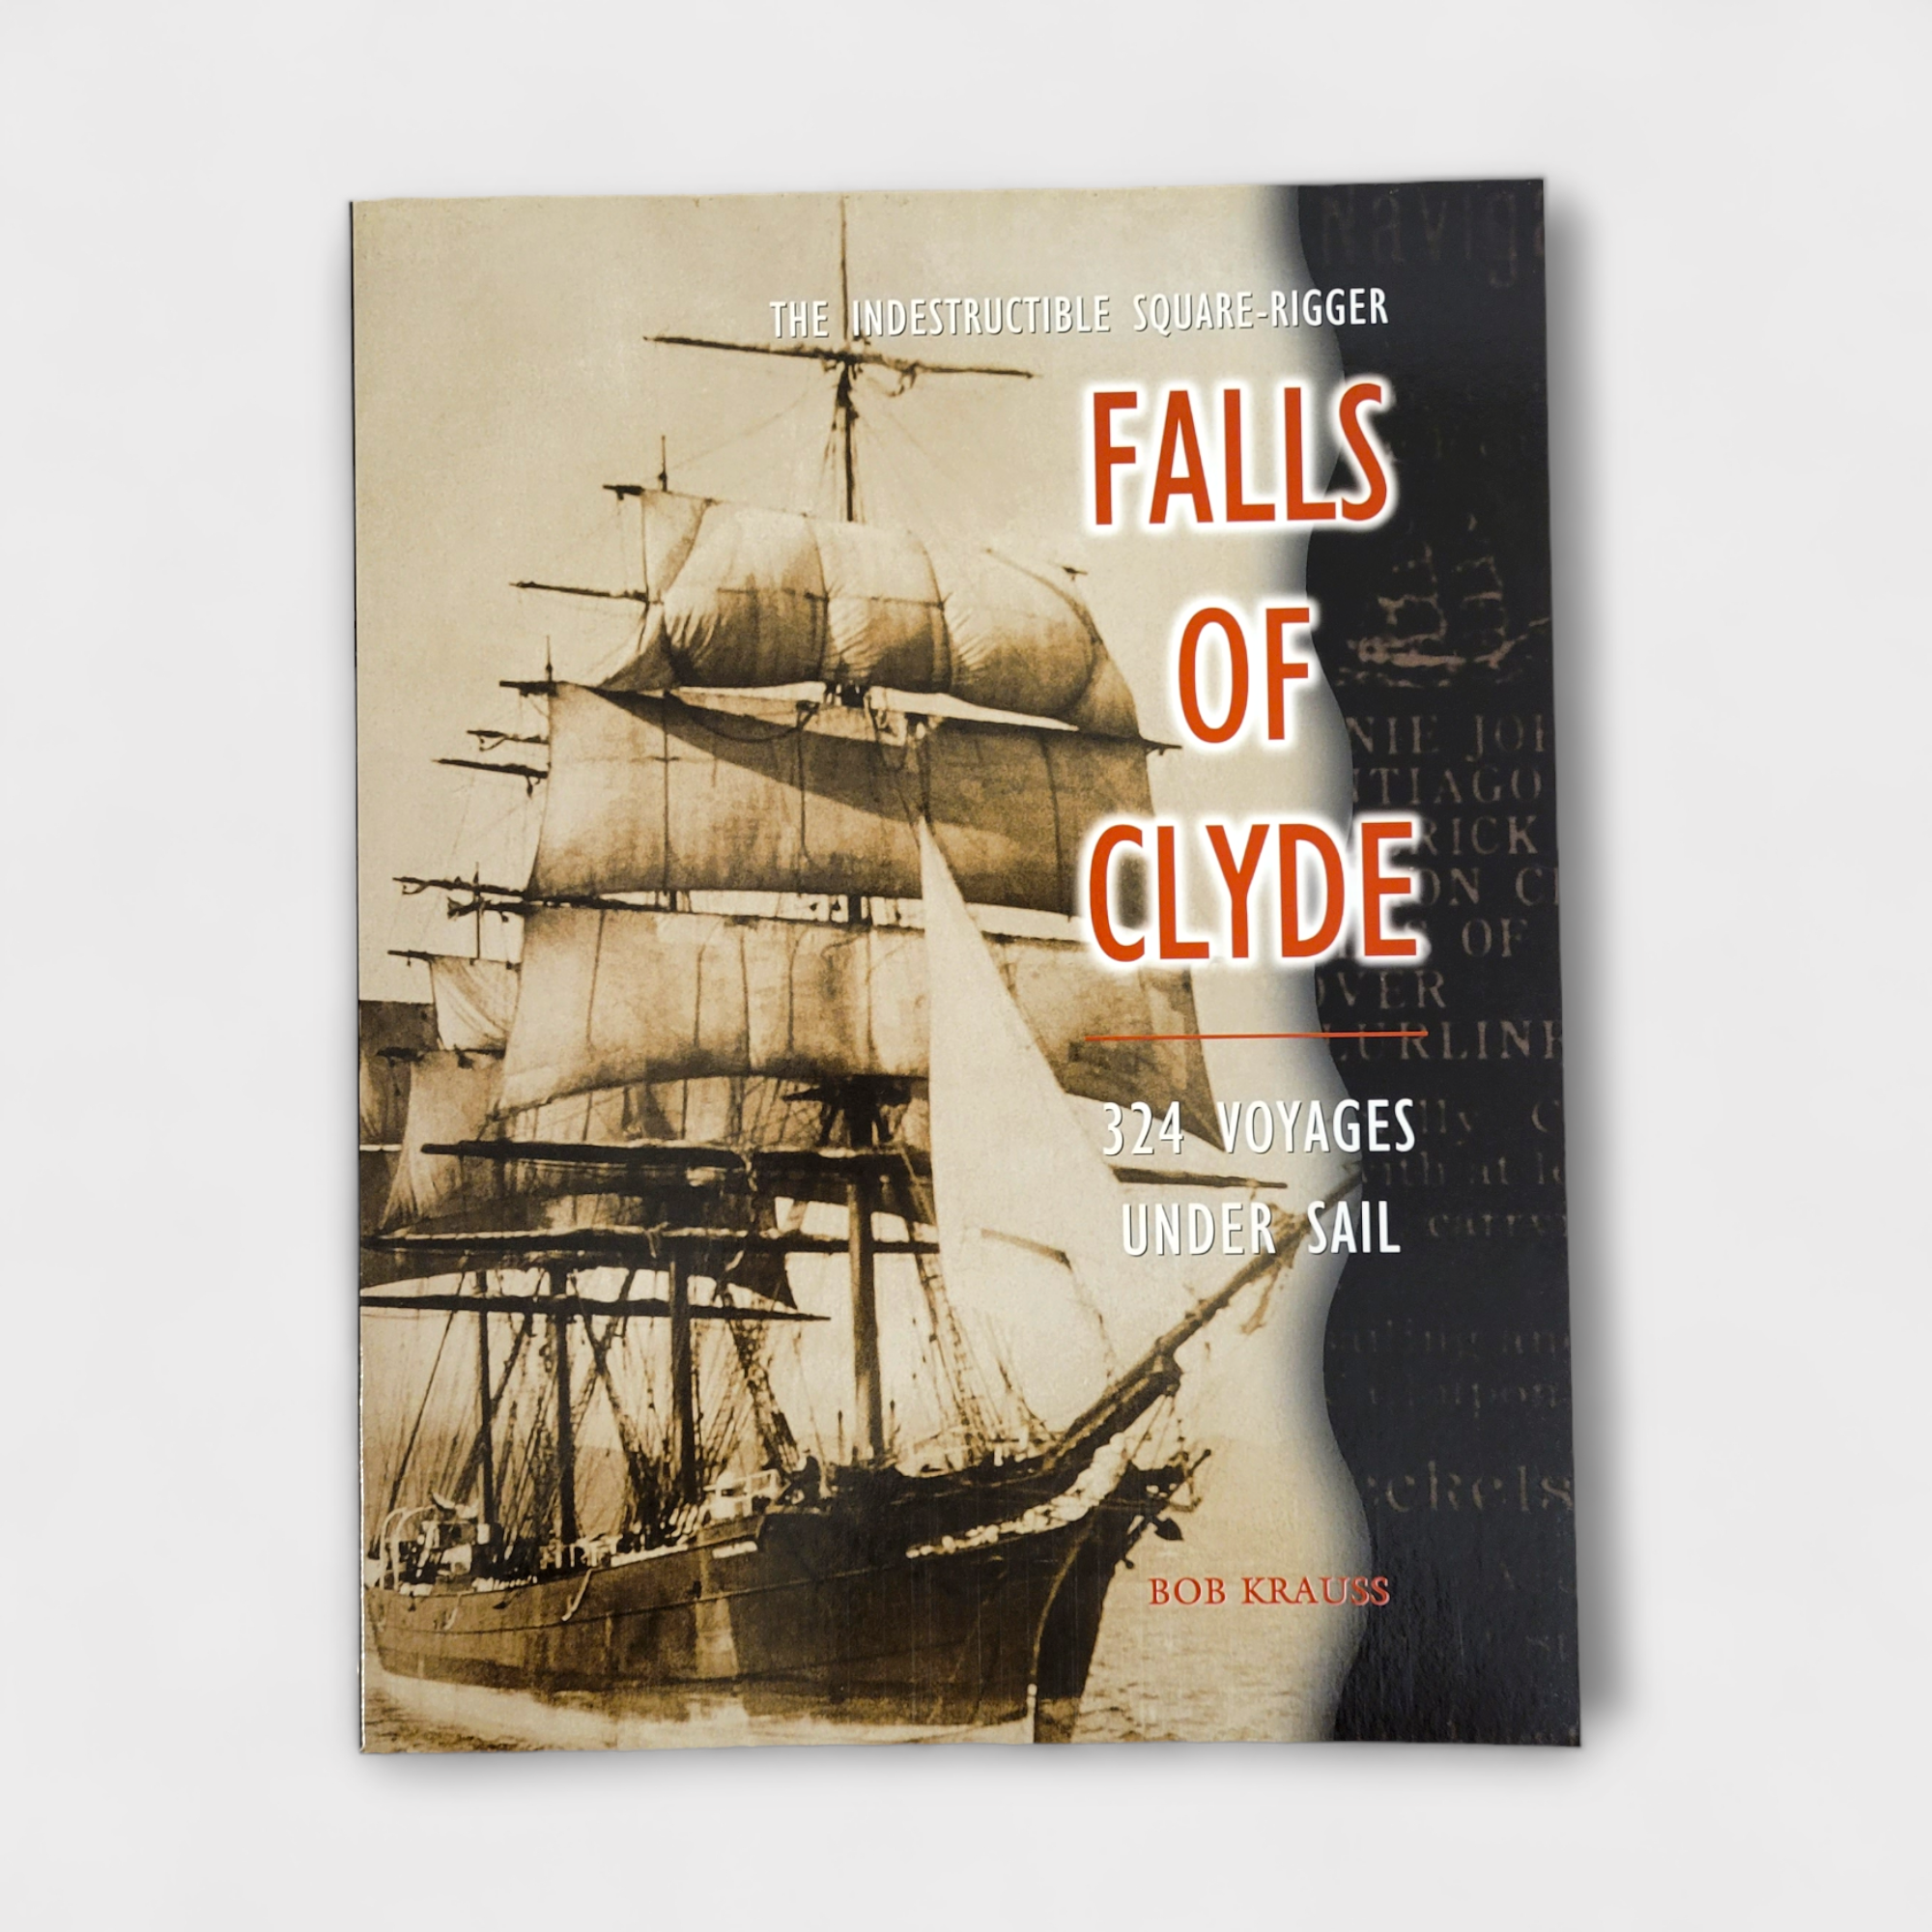 The Indestructible Square-Rigger Falls of Clyde